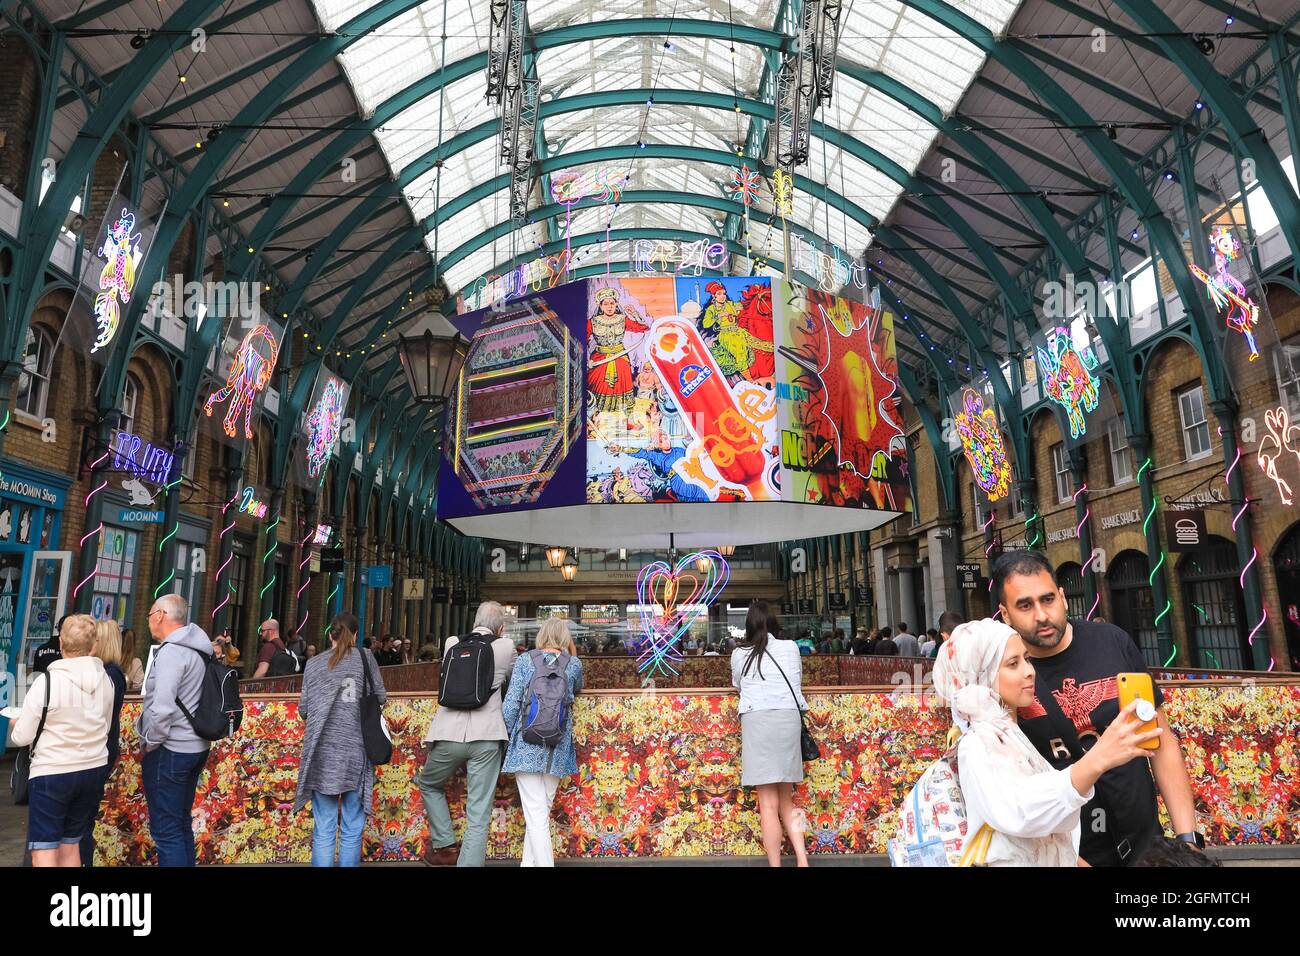 London, UK. 26th Aug, 2021. British artist Chila Burman´s latest art commission transforms London´s historic Covent Garden market halls into a neon wonderland, with vast neon sculpture and filled with uplifting messages for visitors. Credit: Imageplotter/Alamy Live News Stock Photo